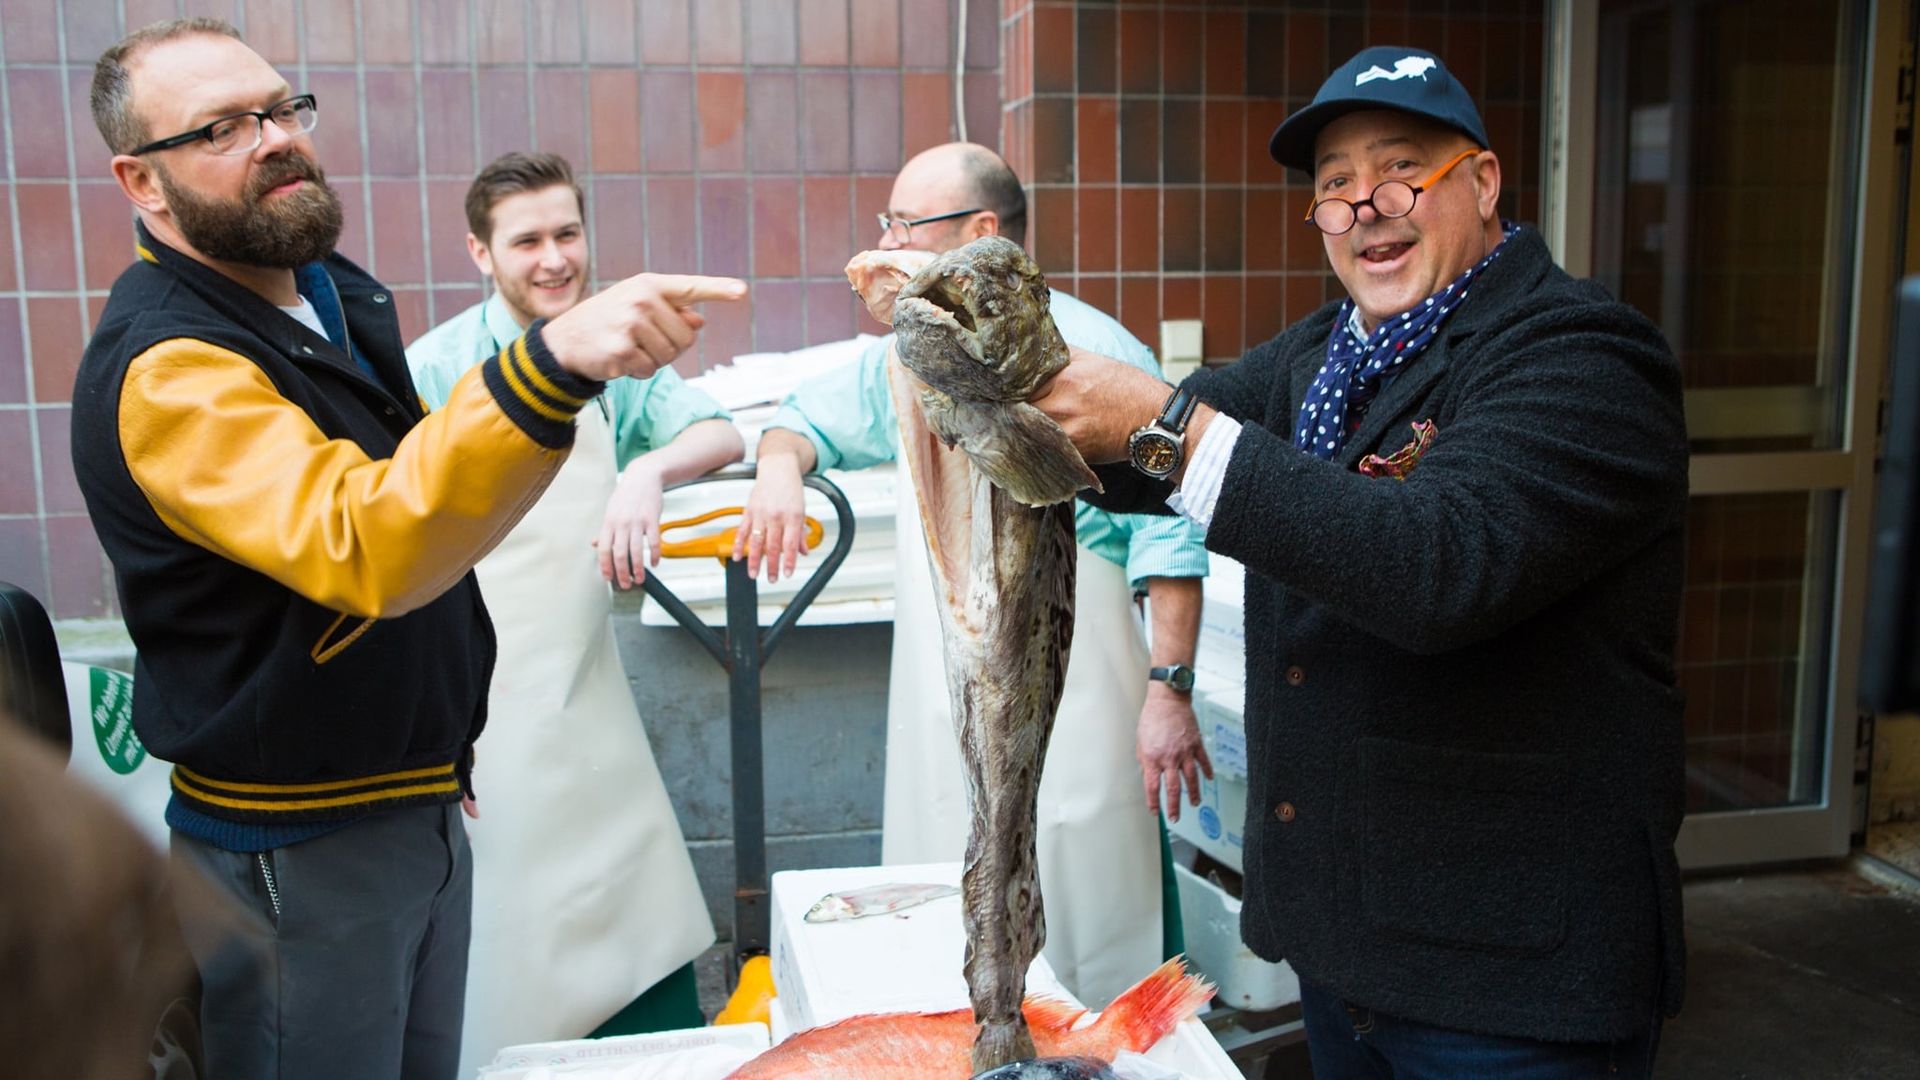 Andrew Zimmern's Driven by Food background